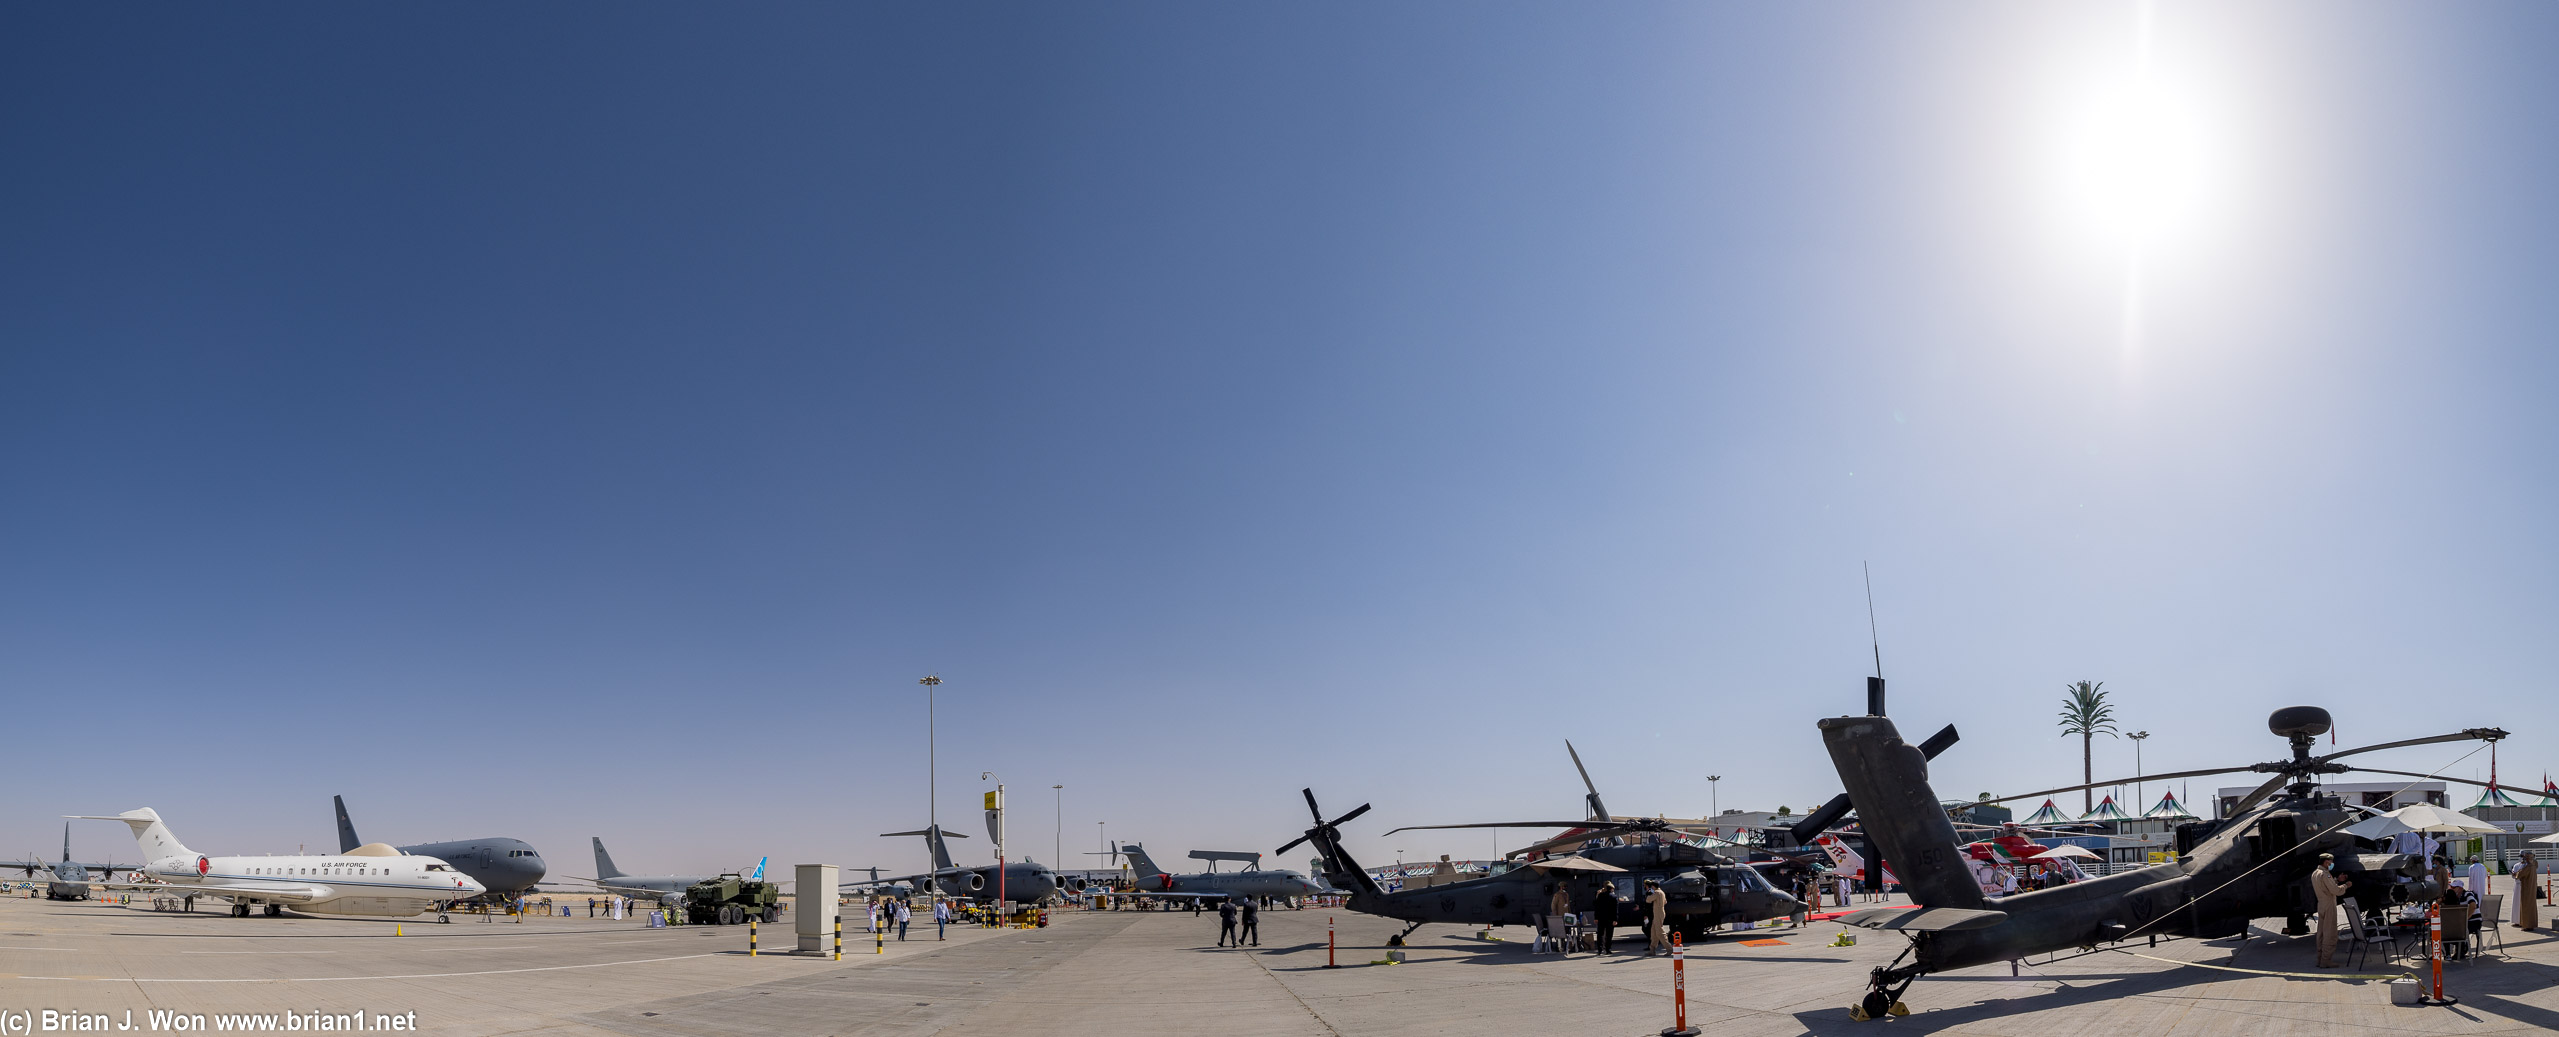 Lots of Western-made hardware at this end. E-11A, KC-46A, Saab GlobalEye, UH-60M, AH-64E.